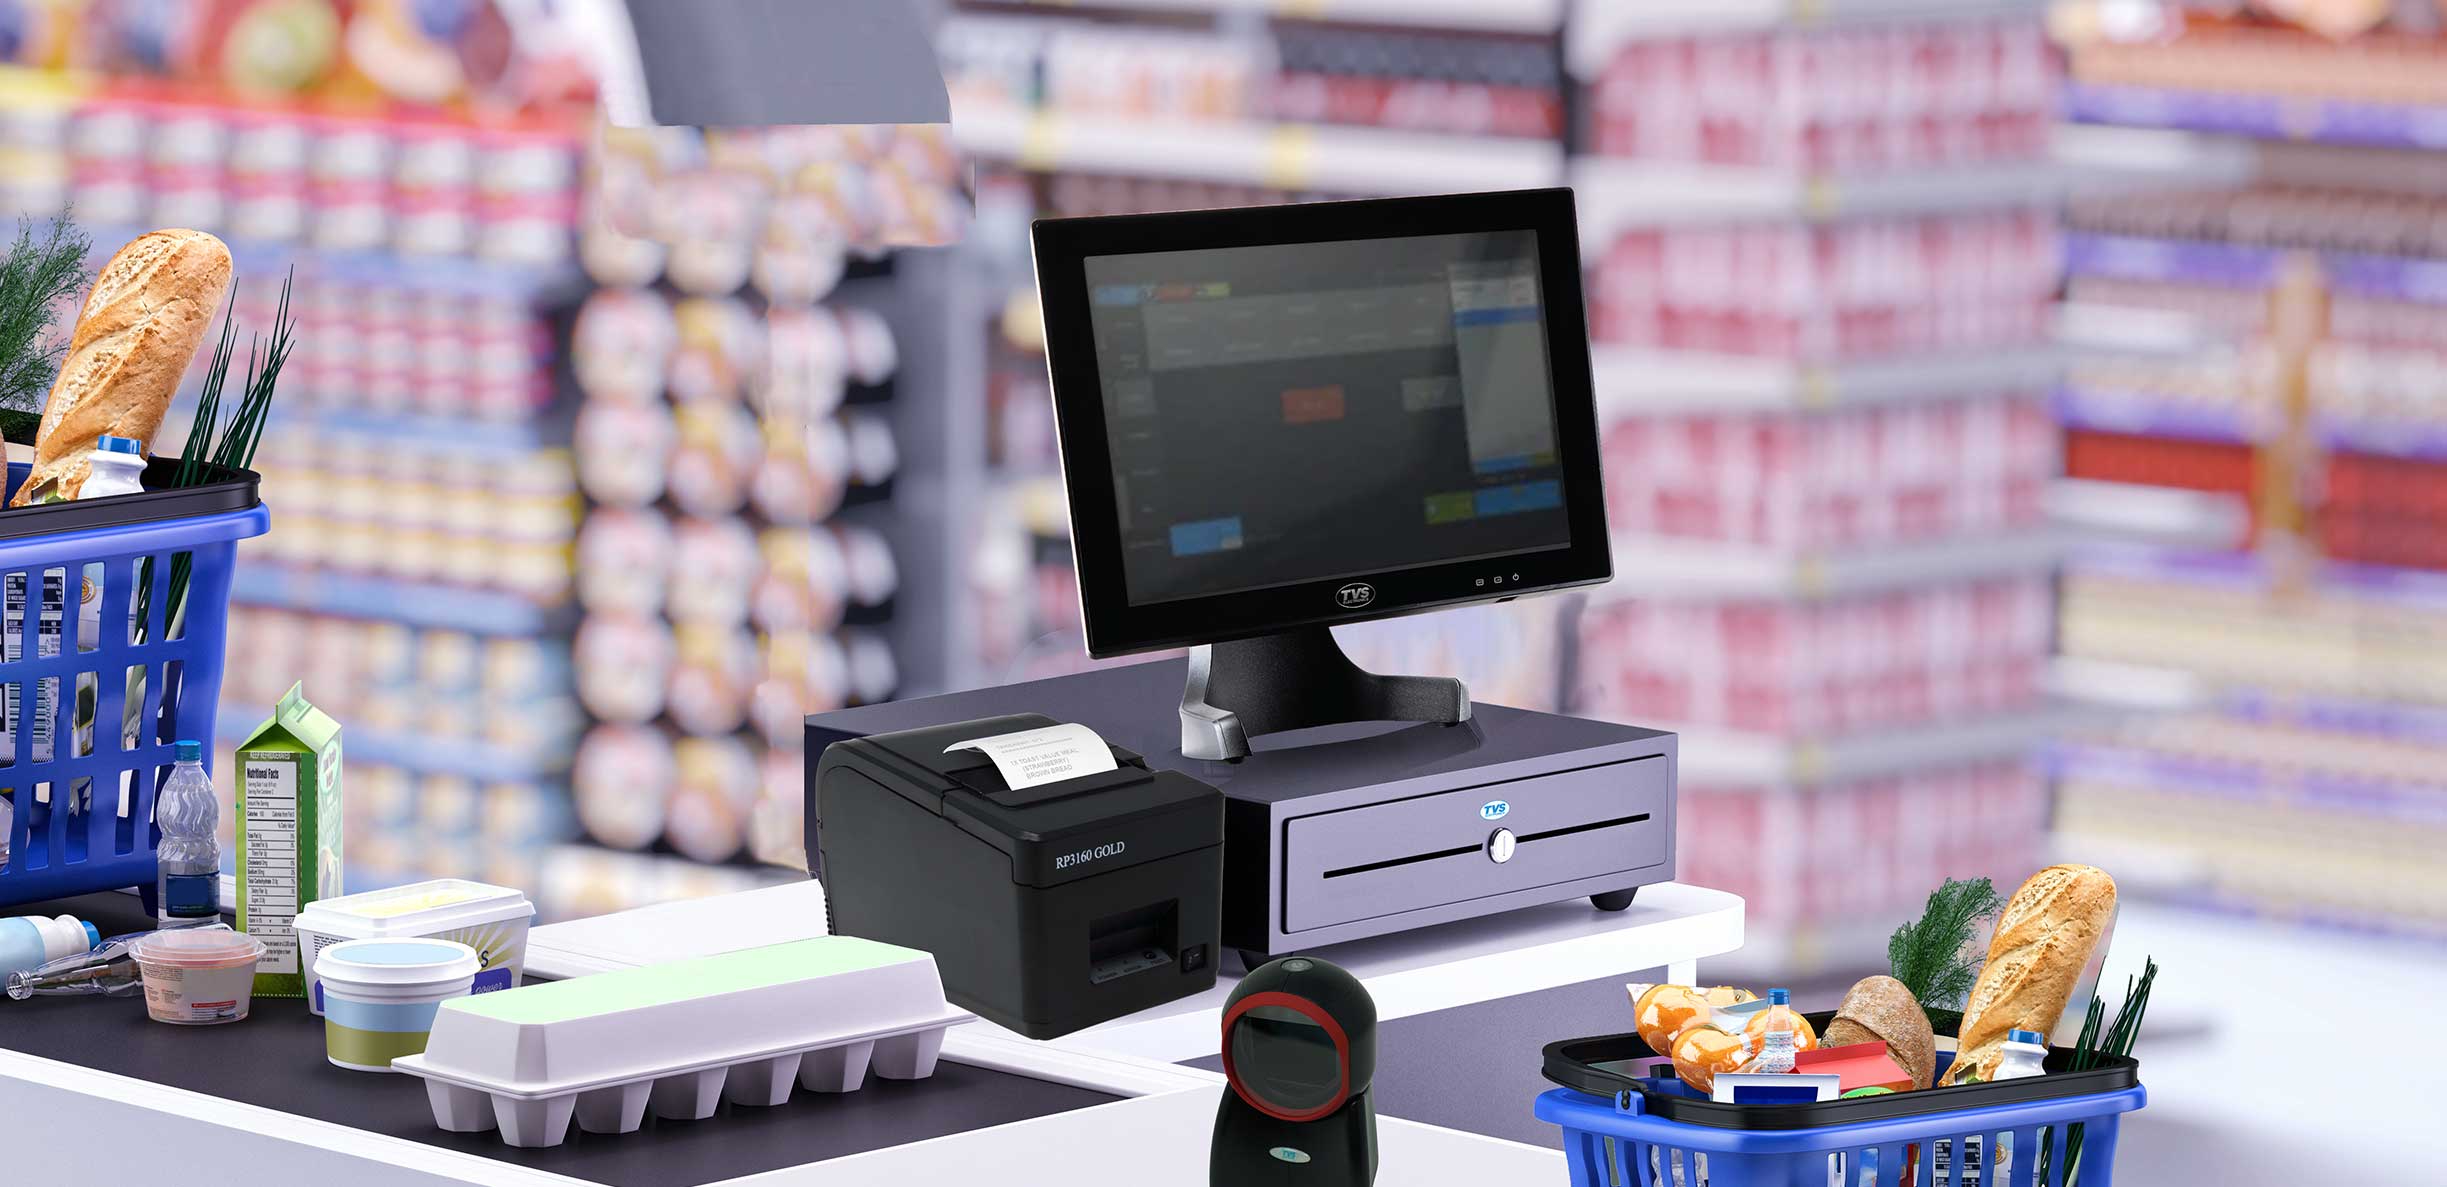 POS system in a store